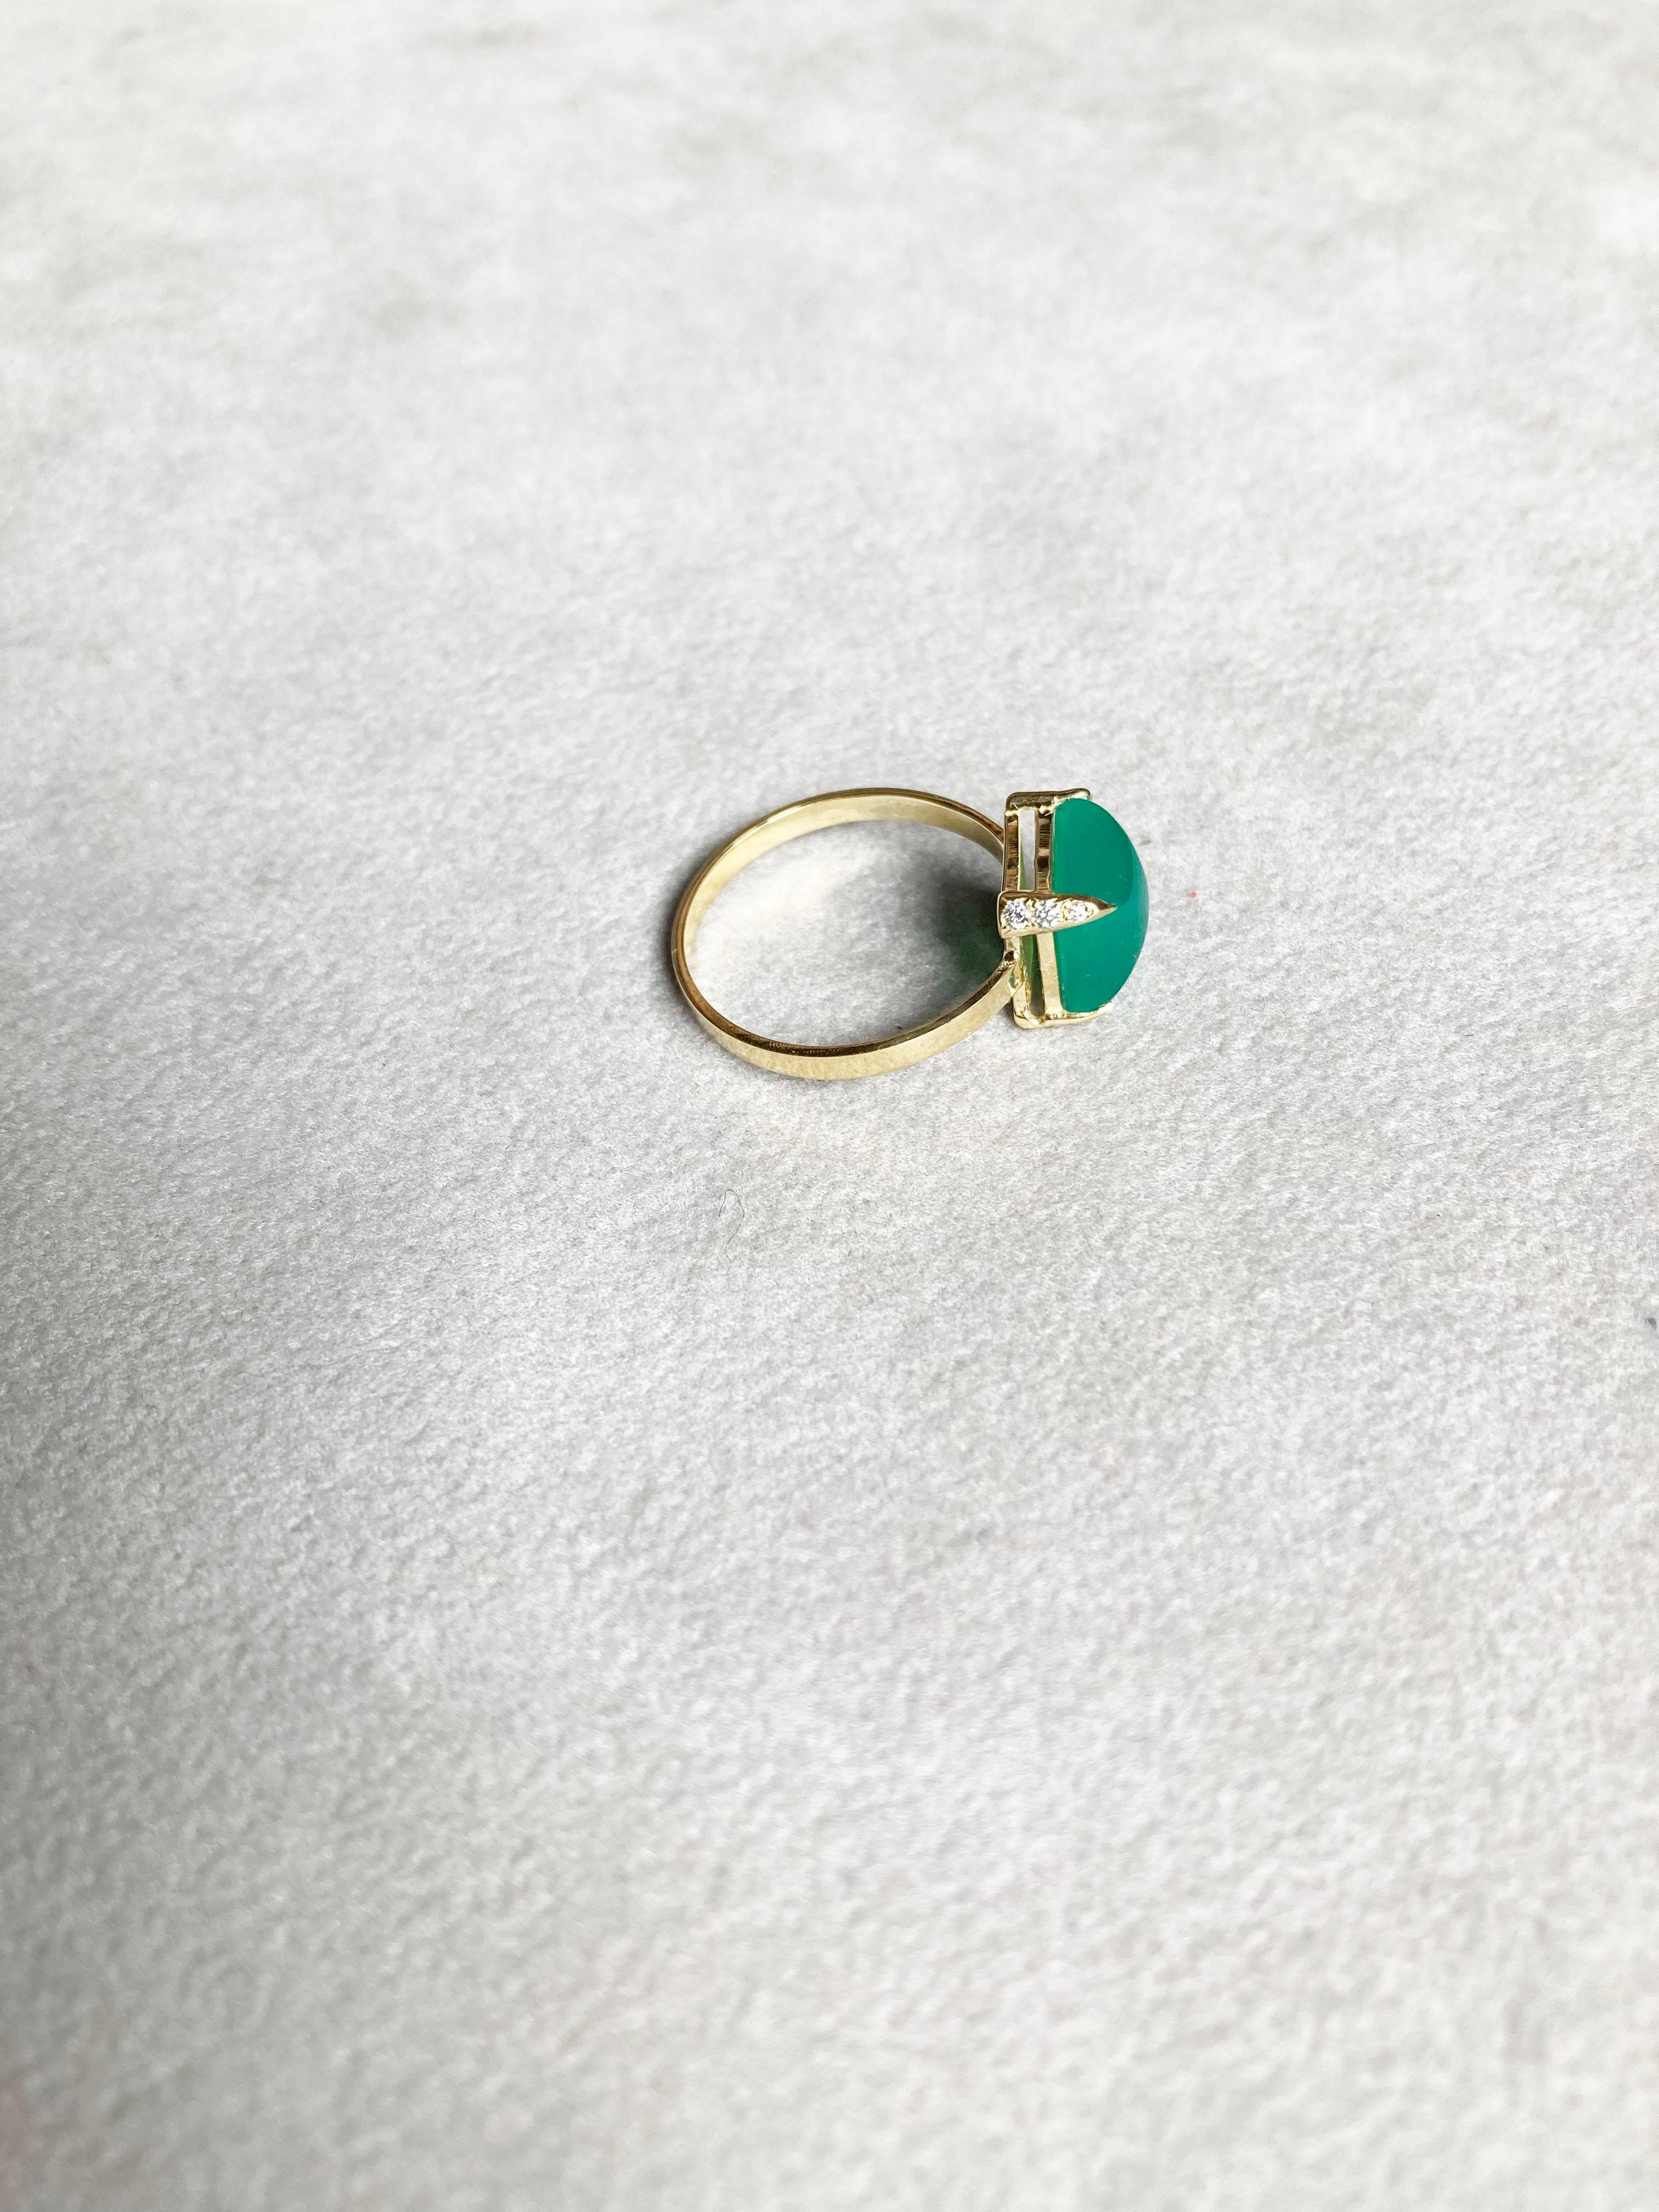 Embark on a timeless journey with Rossella Ugolini's 18K Yellow Gold Ring, featuring an enchanting emerald-green color pyramid of sugarloaf-cut Green Agate. The ring's shank, a flat 3 mm band of yellow gold, bears a subtle hammered texture,